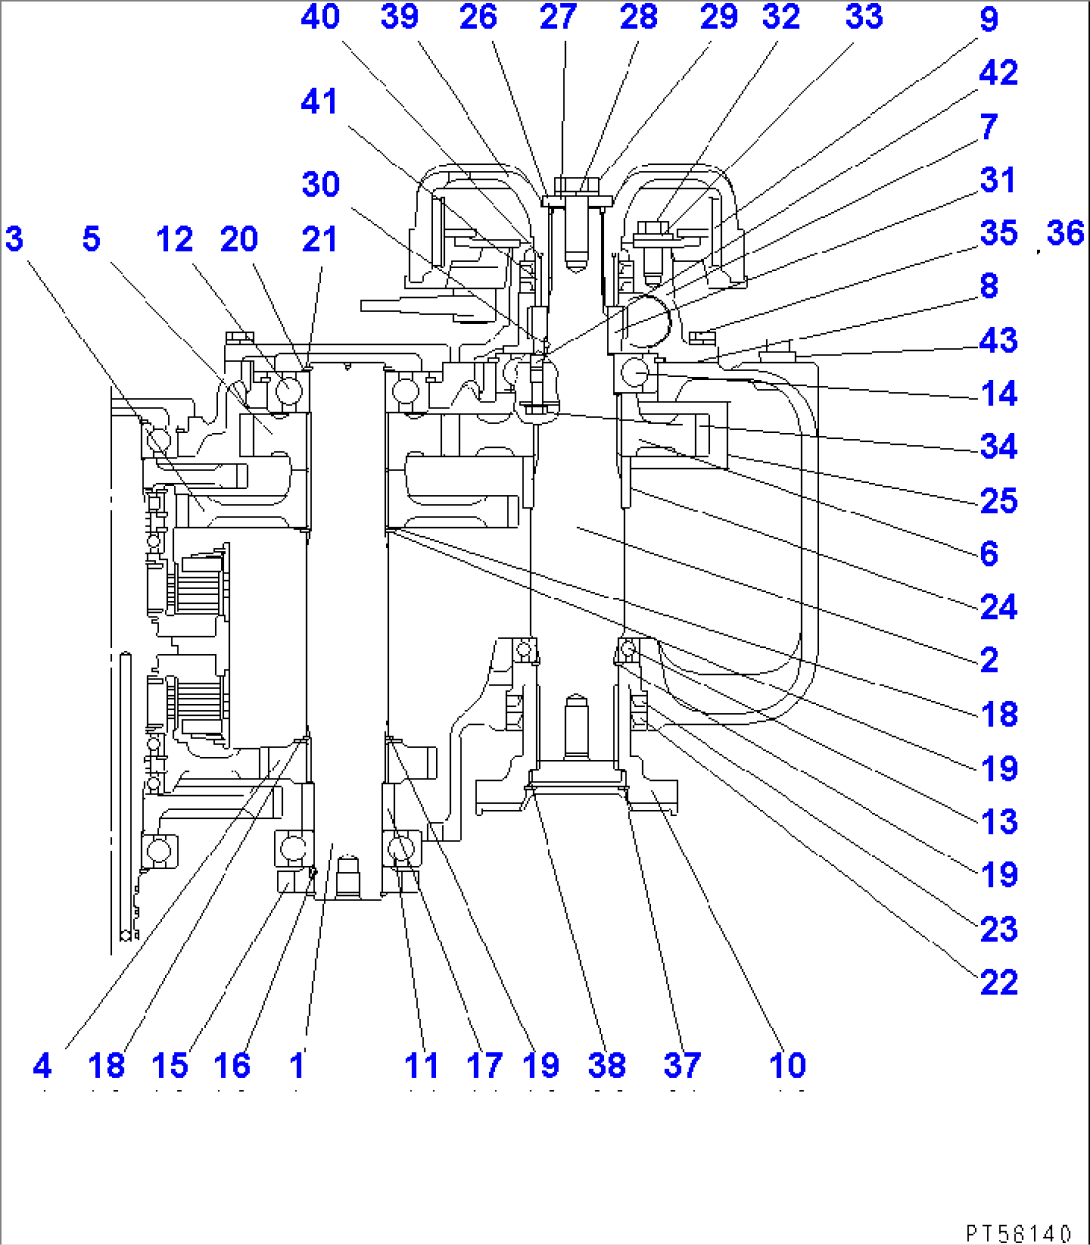 TRANSMISSION (OUTPUT SHAFT AND GEAR)